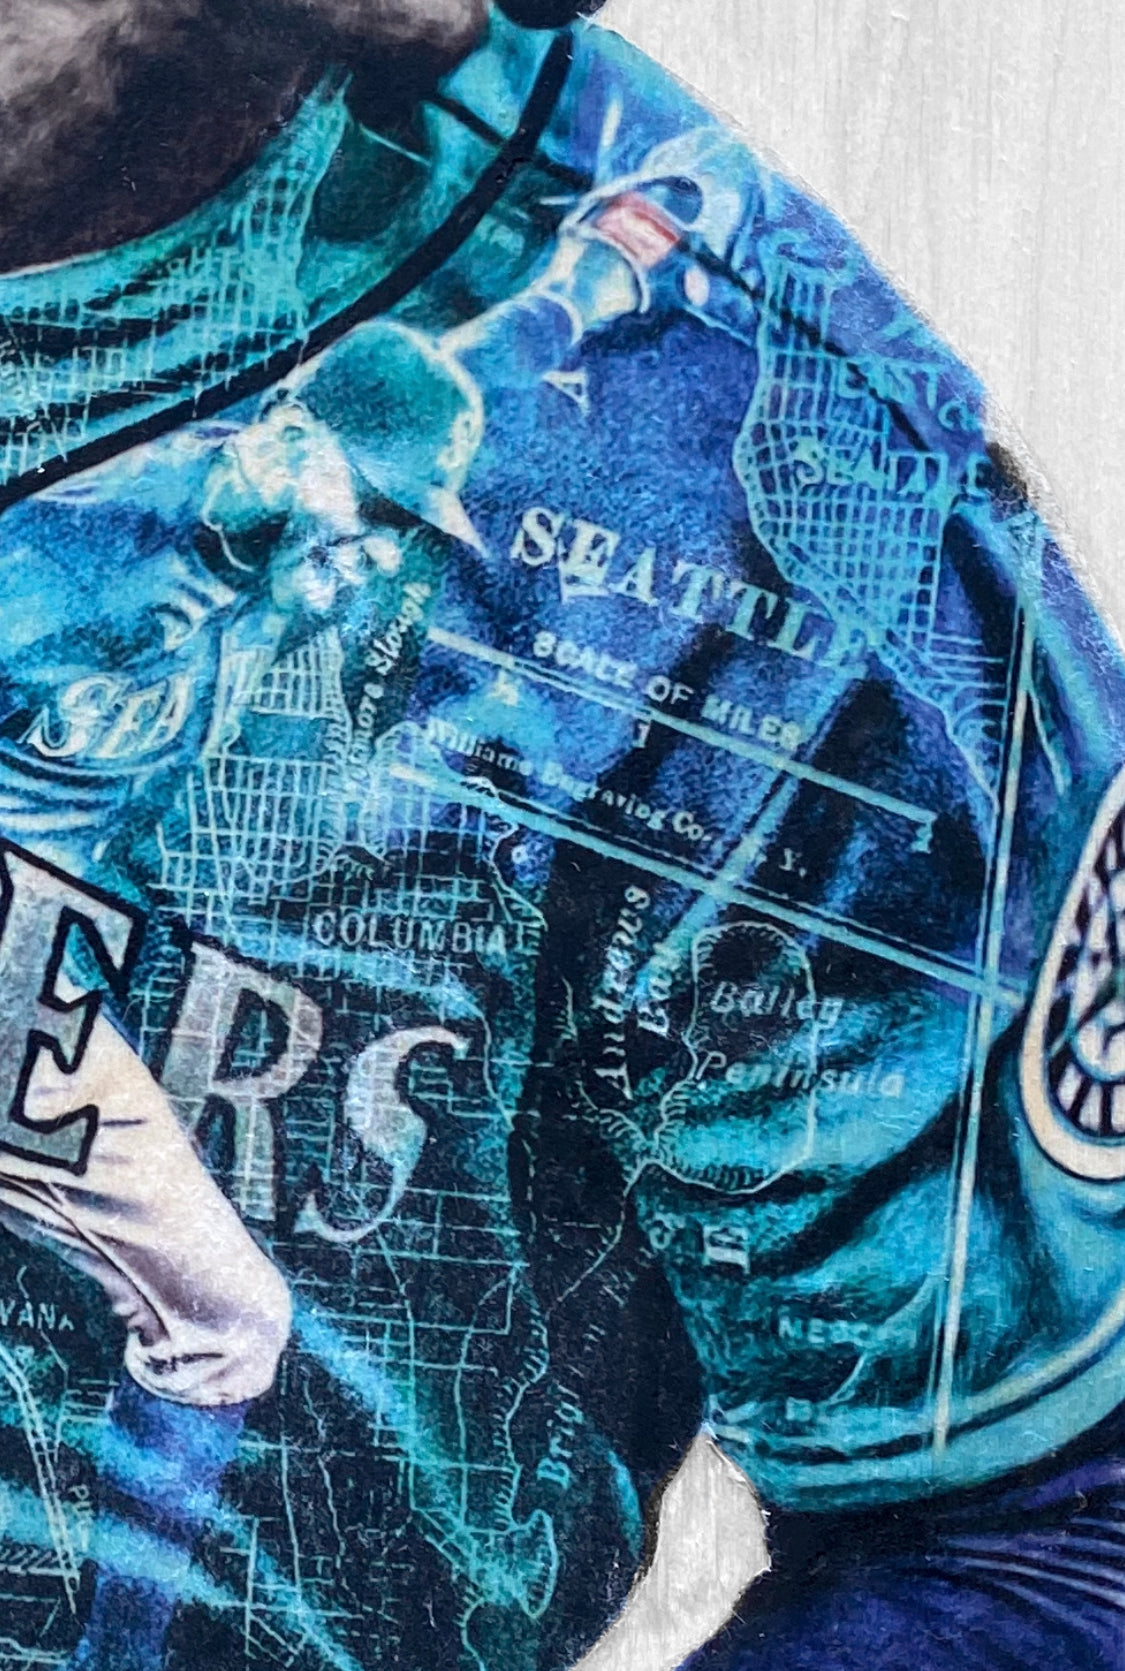 "KLew_1" (Kyle Lewis ft. JP Crawford) Seattle Mariners - Officially Licensed MLB Print - Limited Release